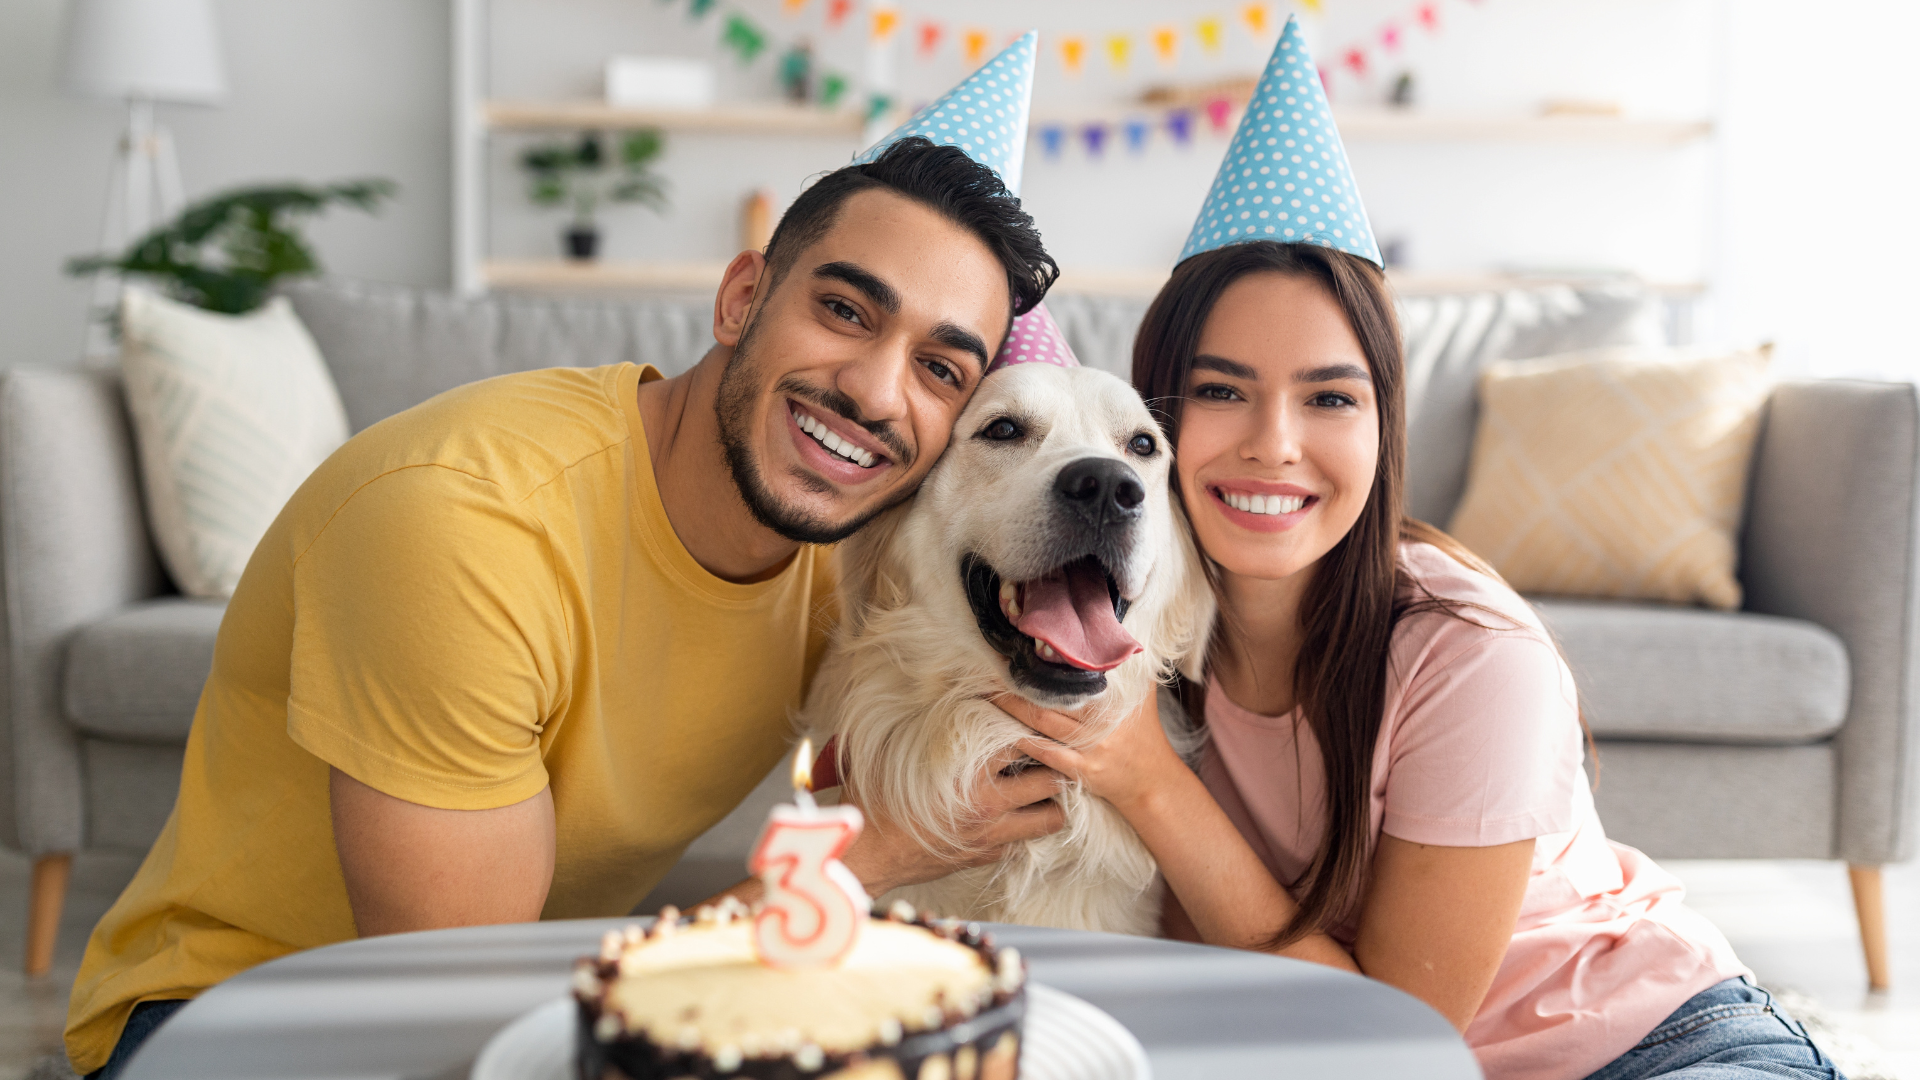 What to do for Dogs Birthday